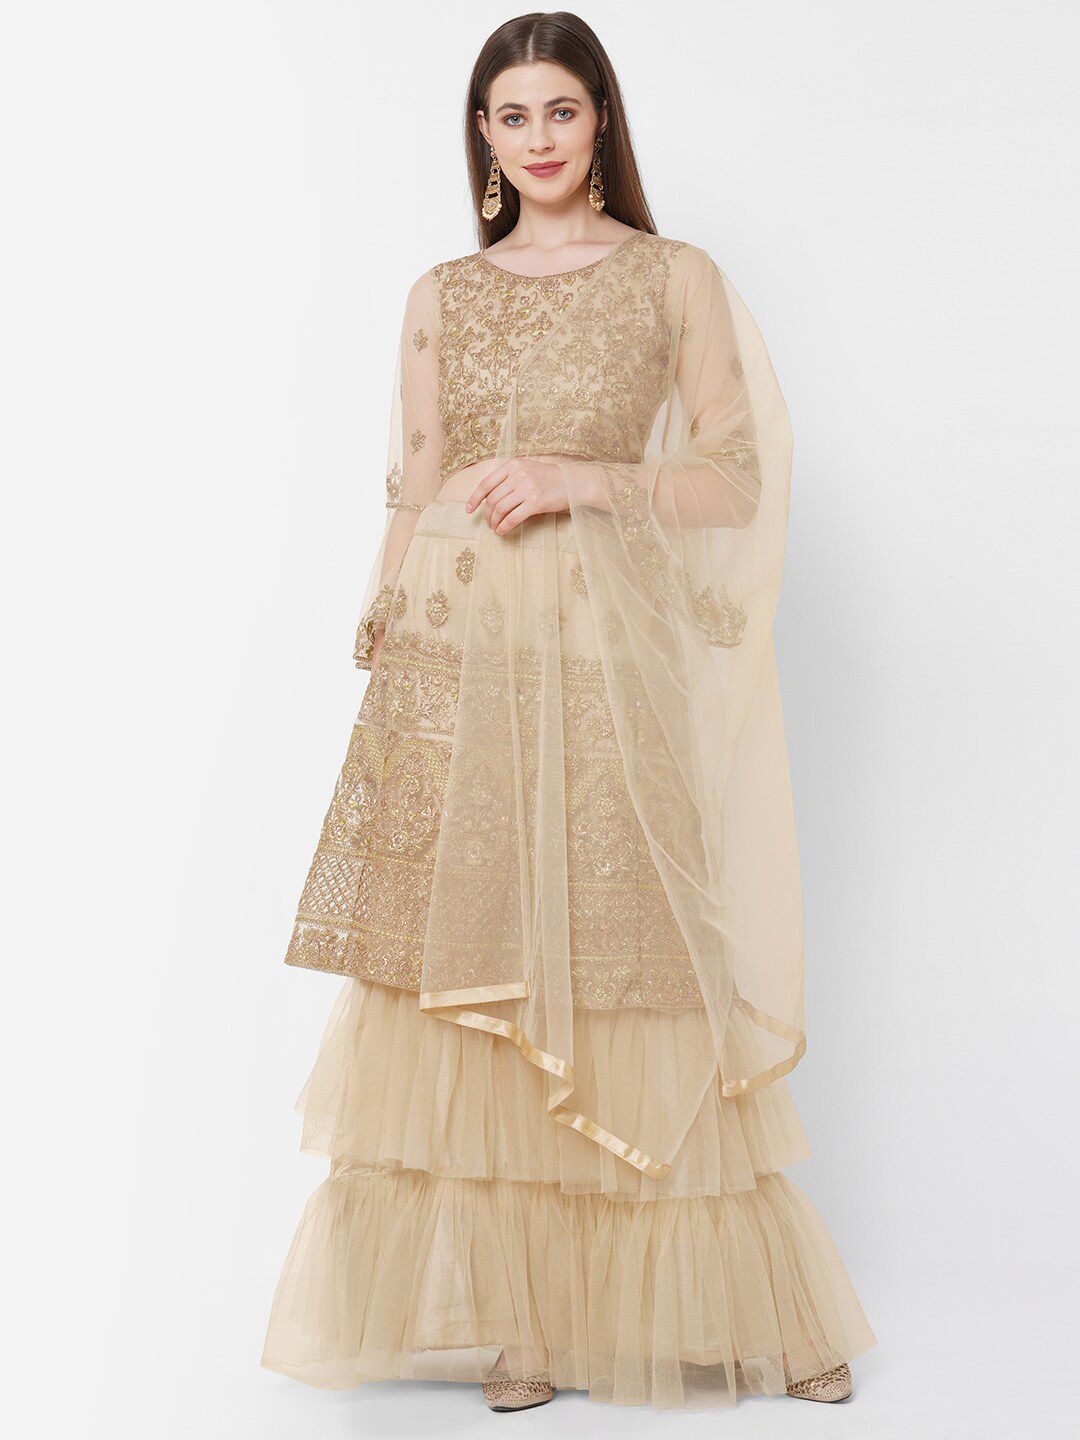 RedRound Brown Embroidered Semi-Stitched Lehenga & Unstitched Blouse With Dupatta Price in India